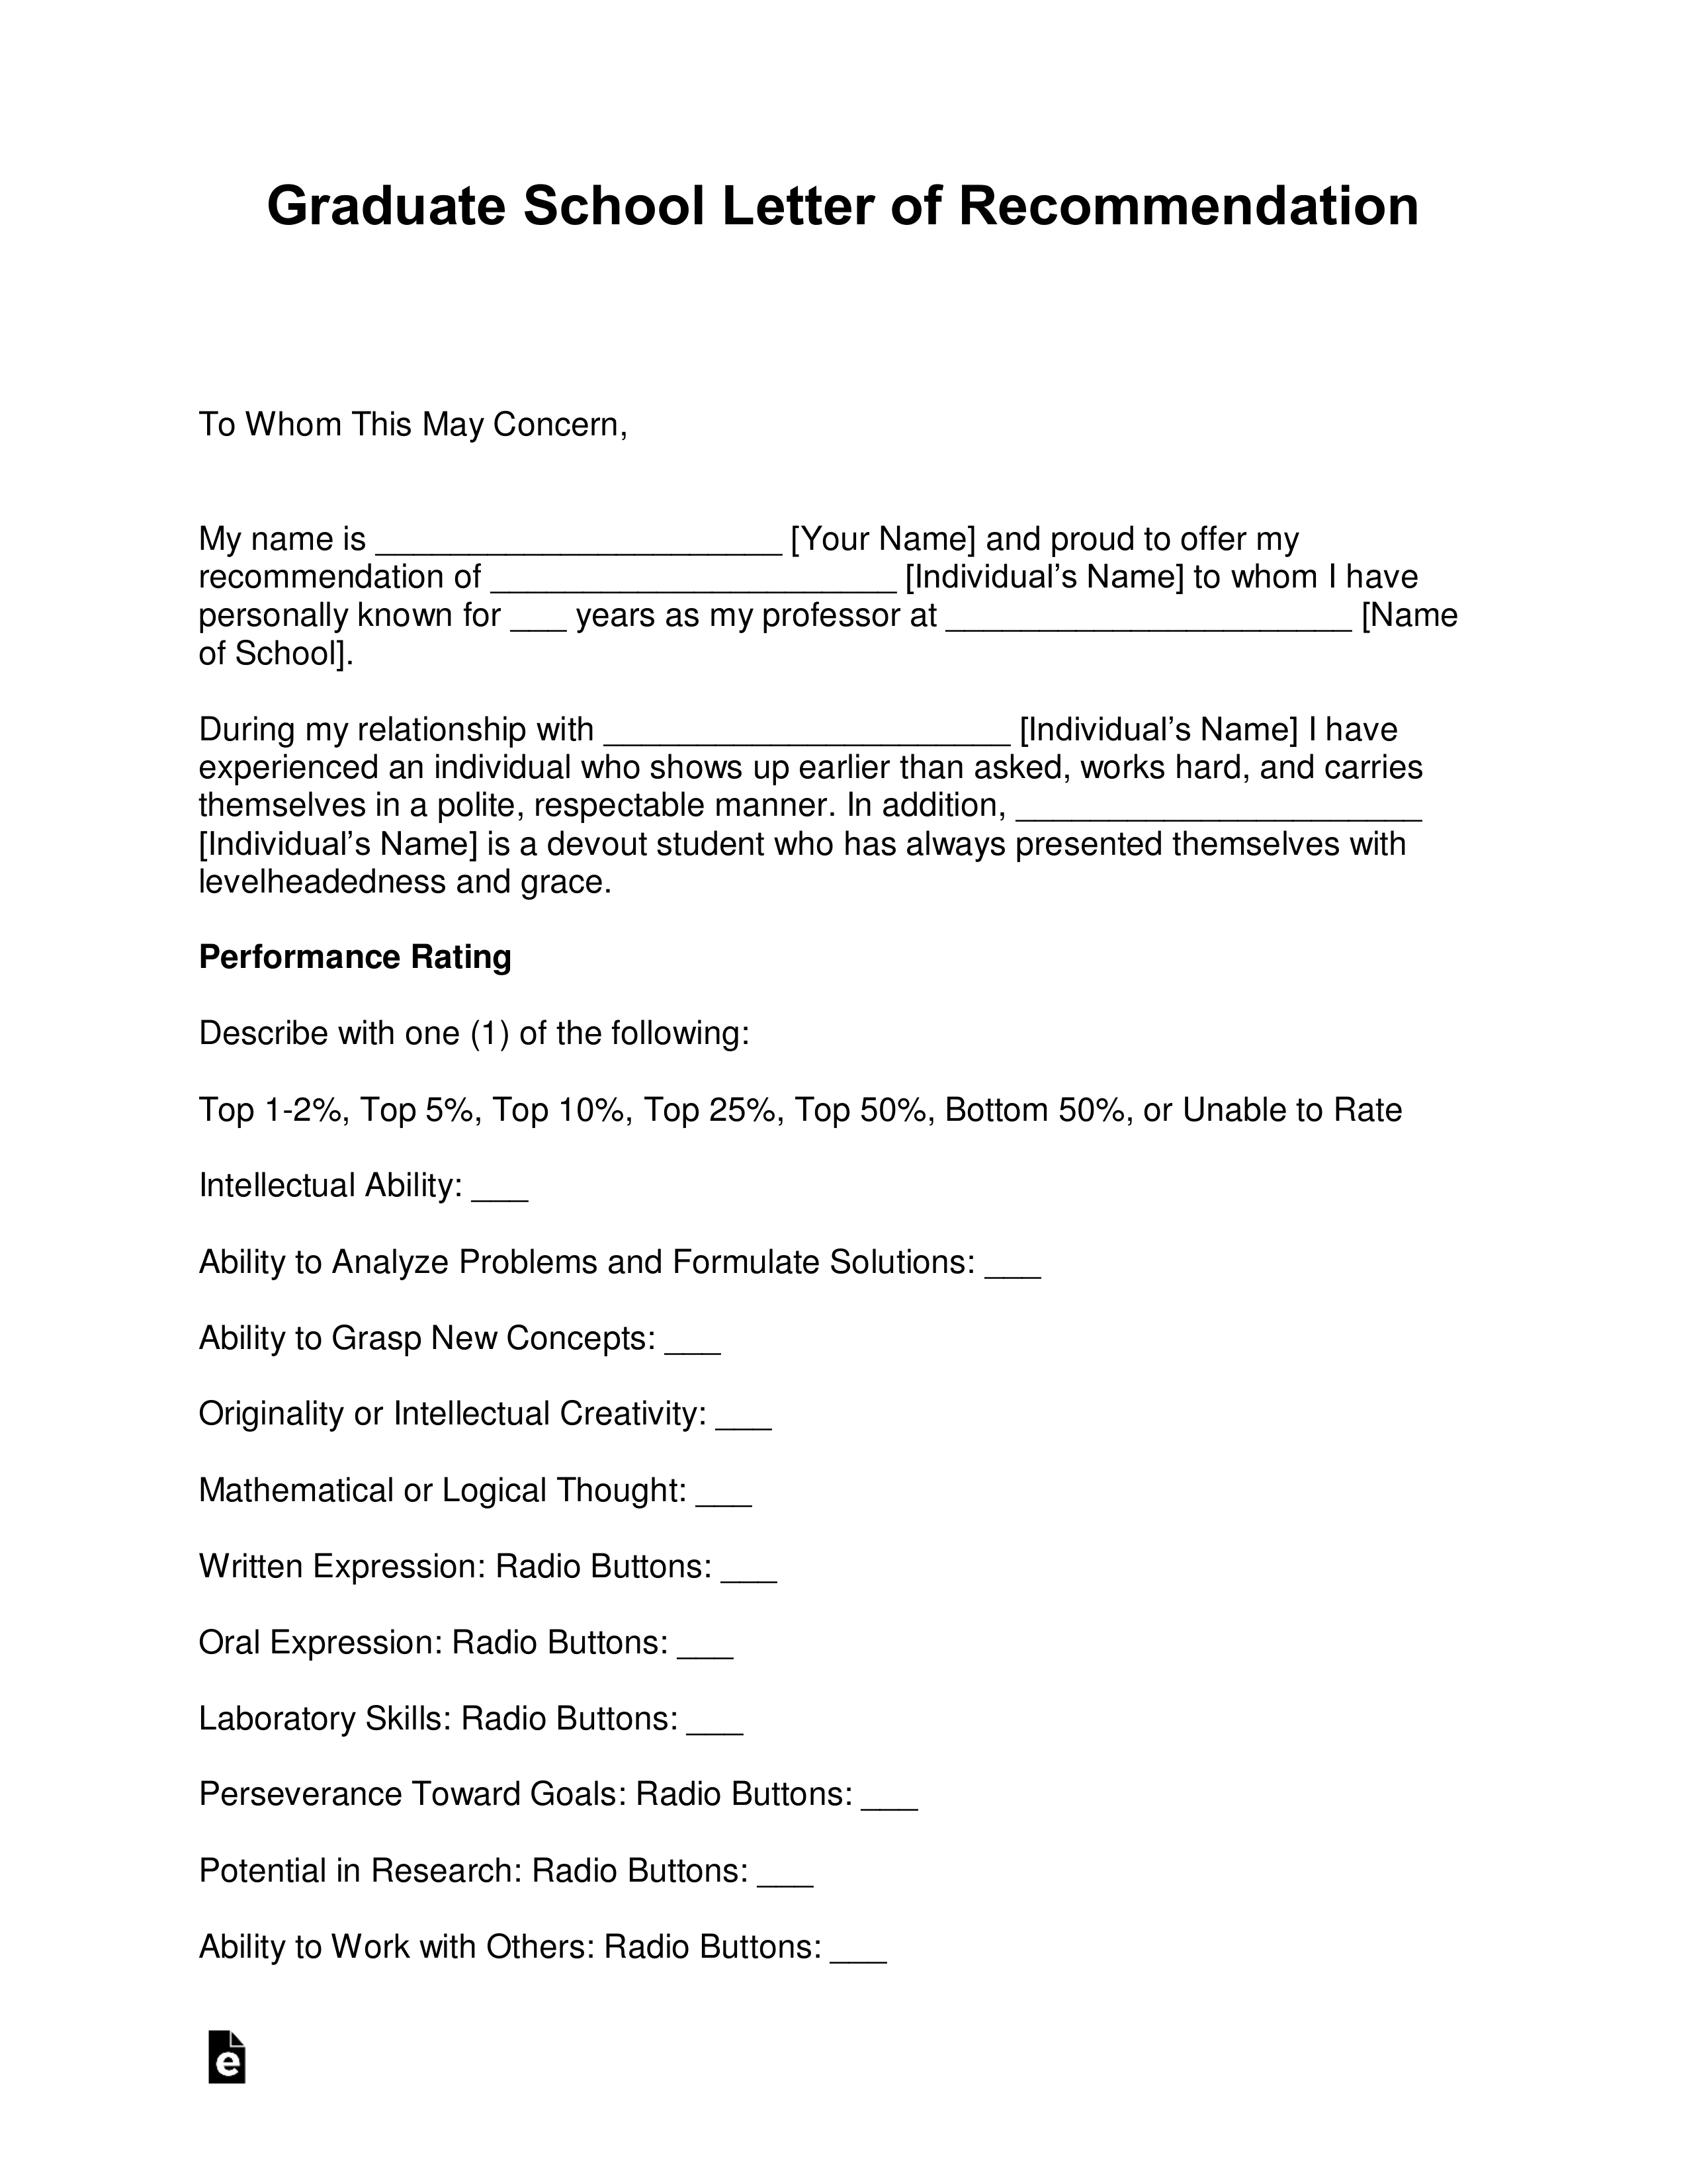 Professional Letter Of Recommendation For Employment Pdf from eforms.com